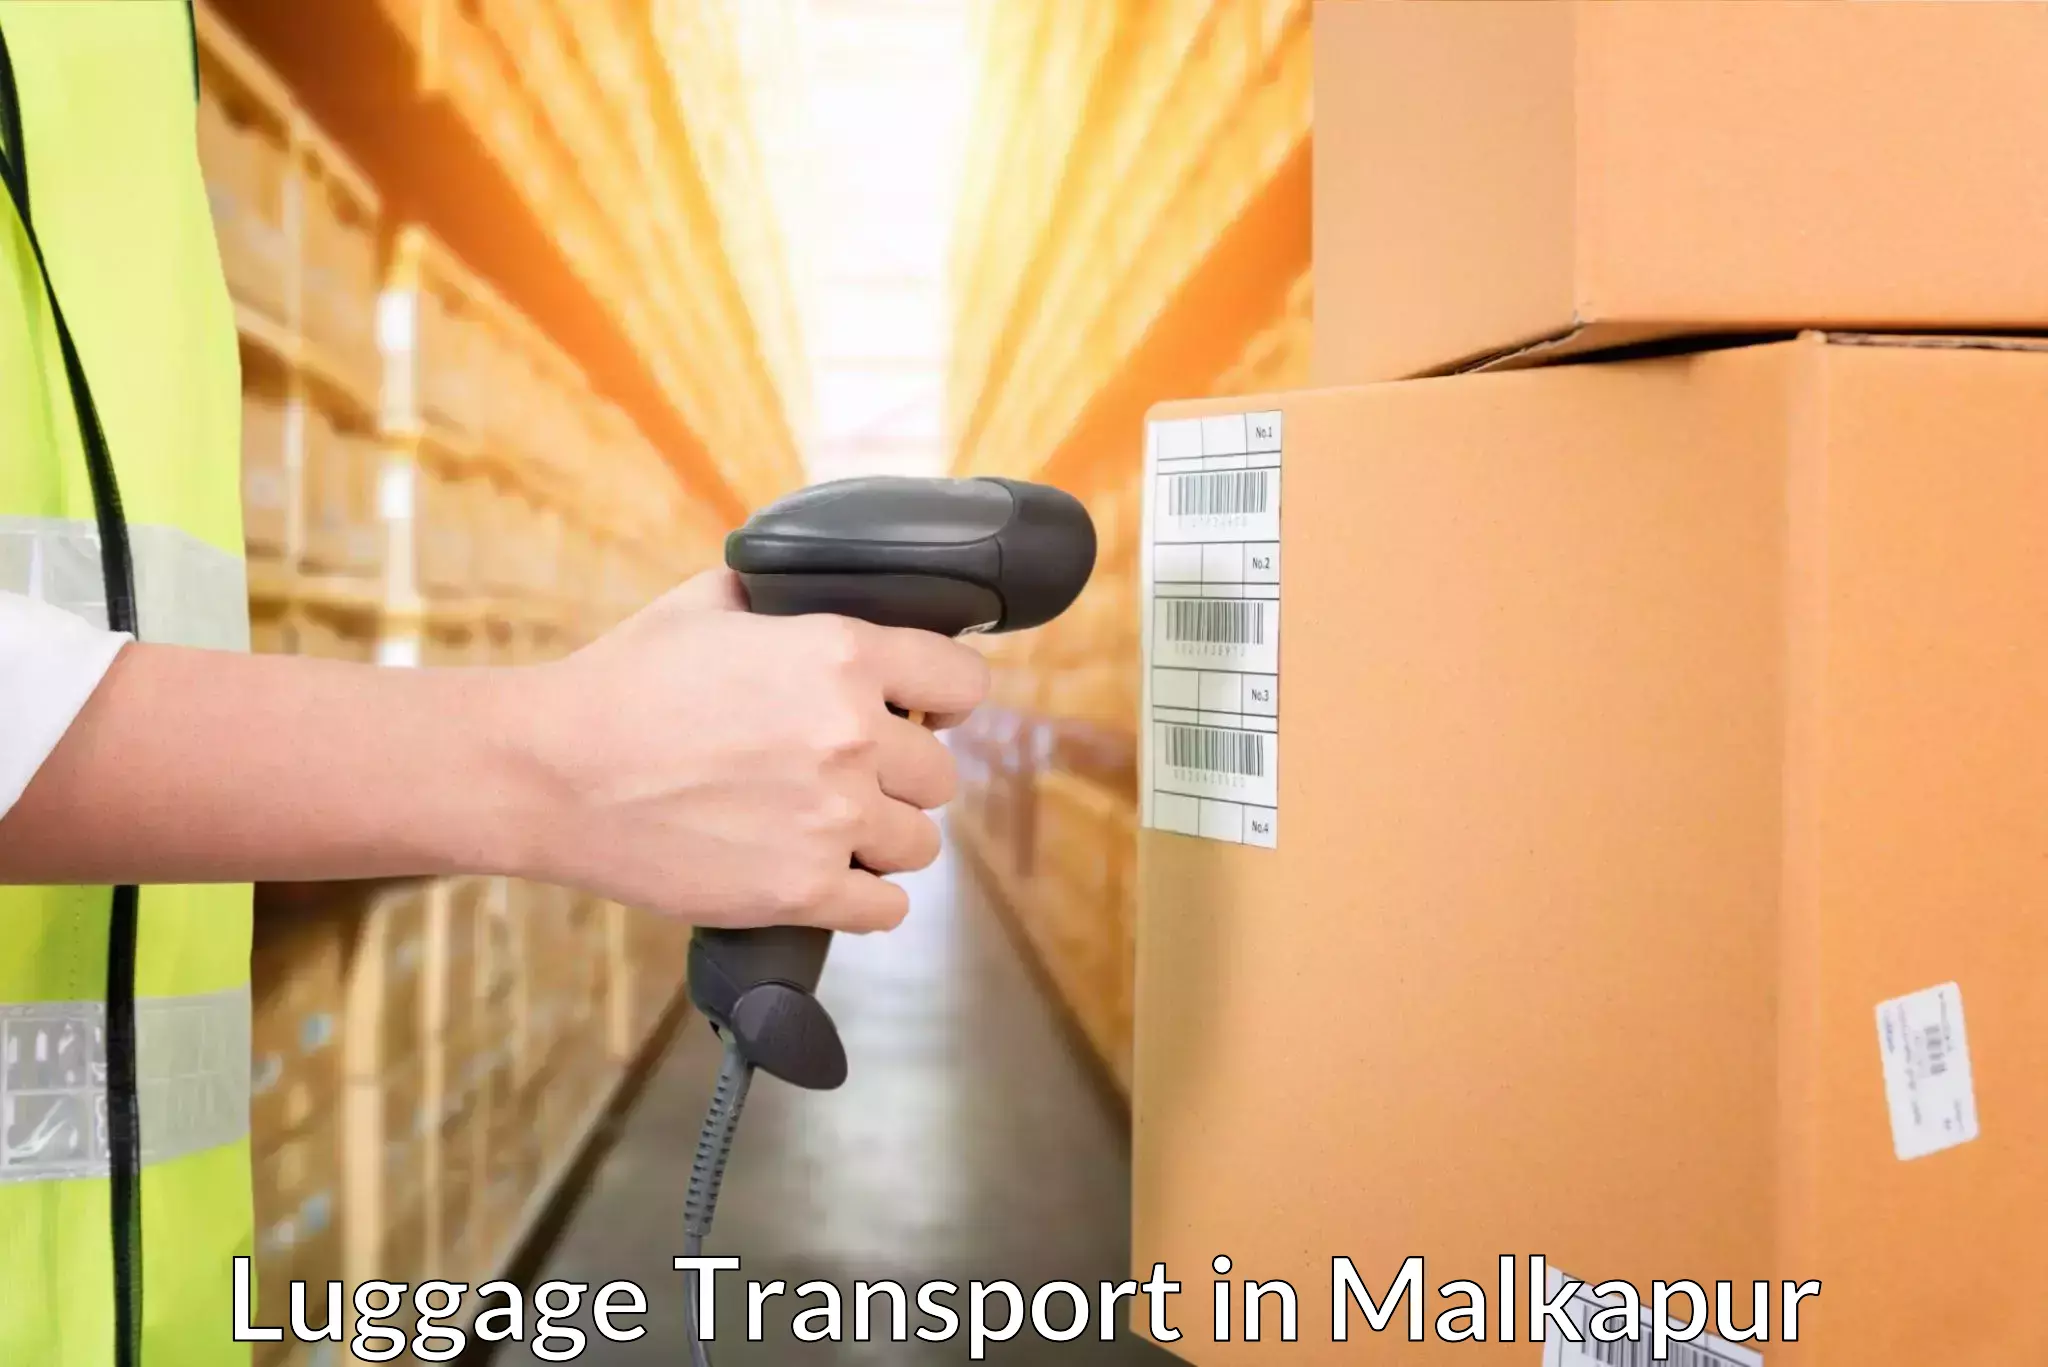 Luggage shipping planner in Malkapur